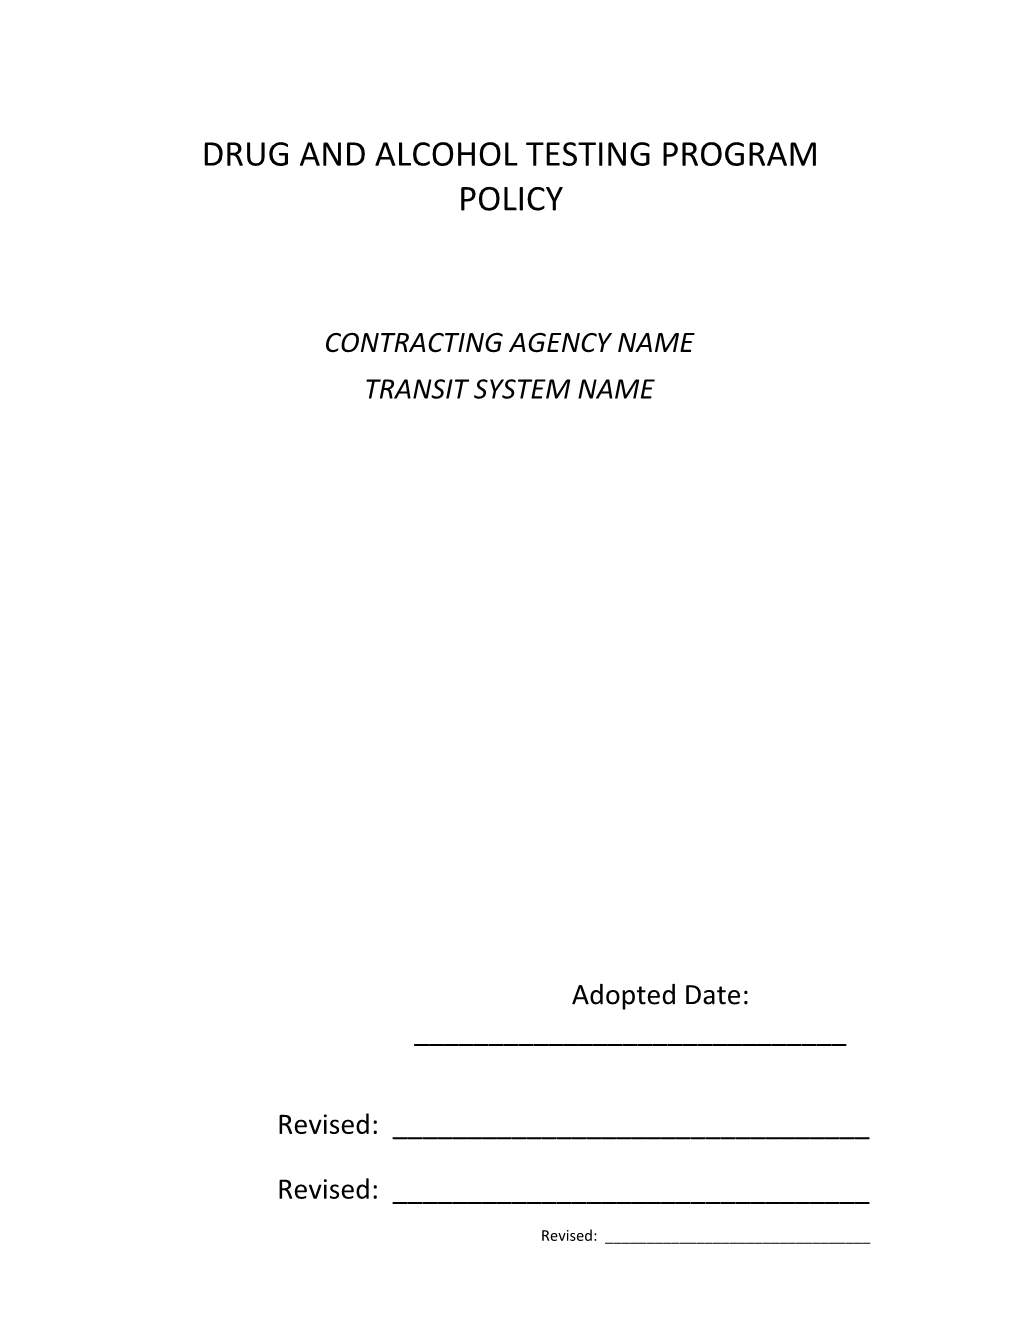 Drug and Alcohol Testing Program Policy